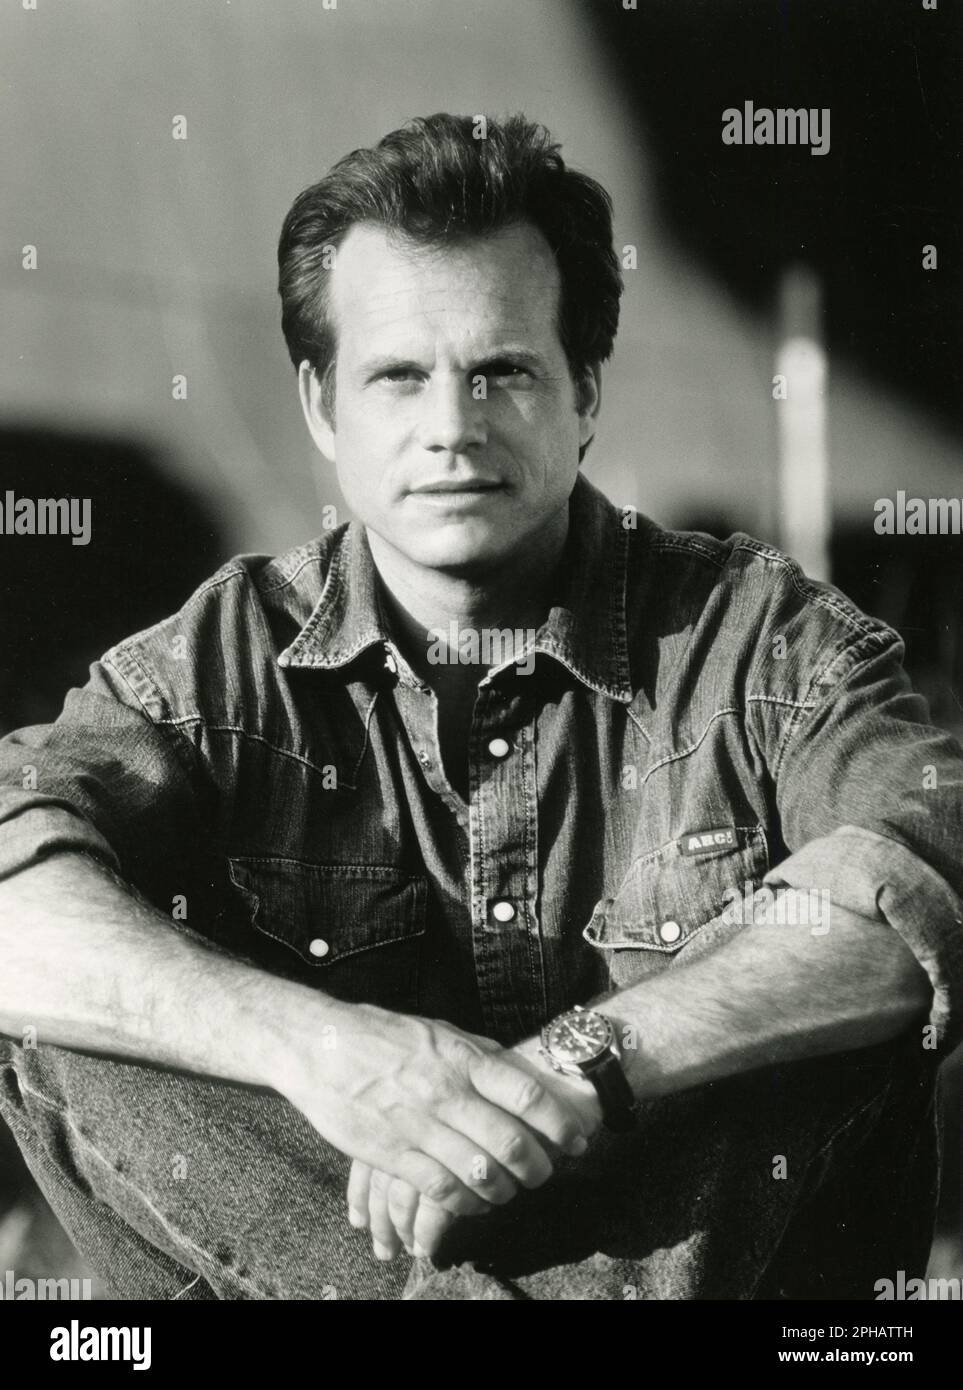 Actor Bill Paxton in the movie Twister, USA 1996 Stock Photo